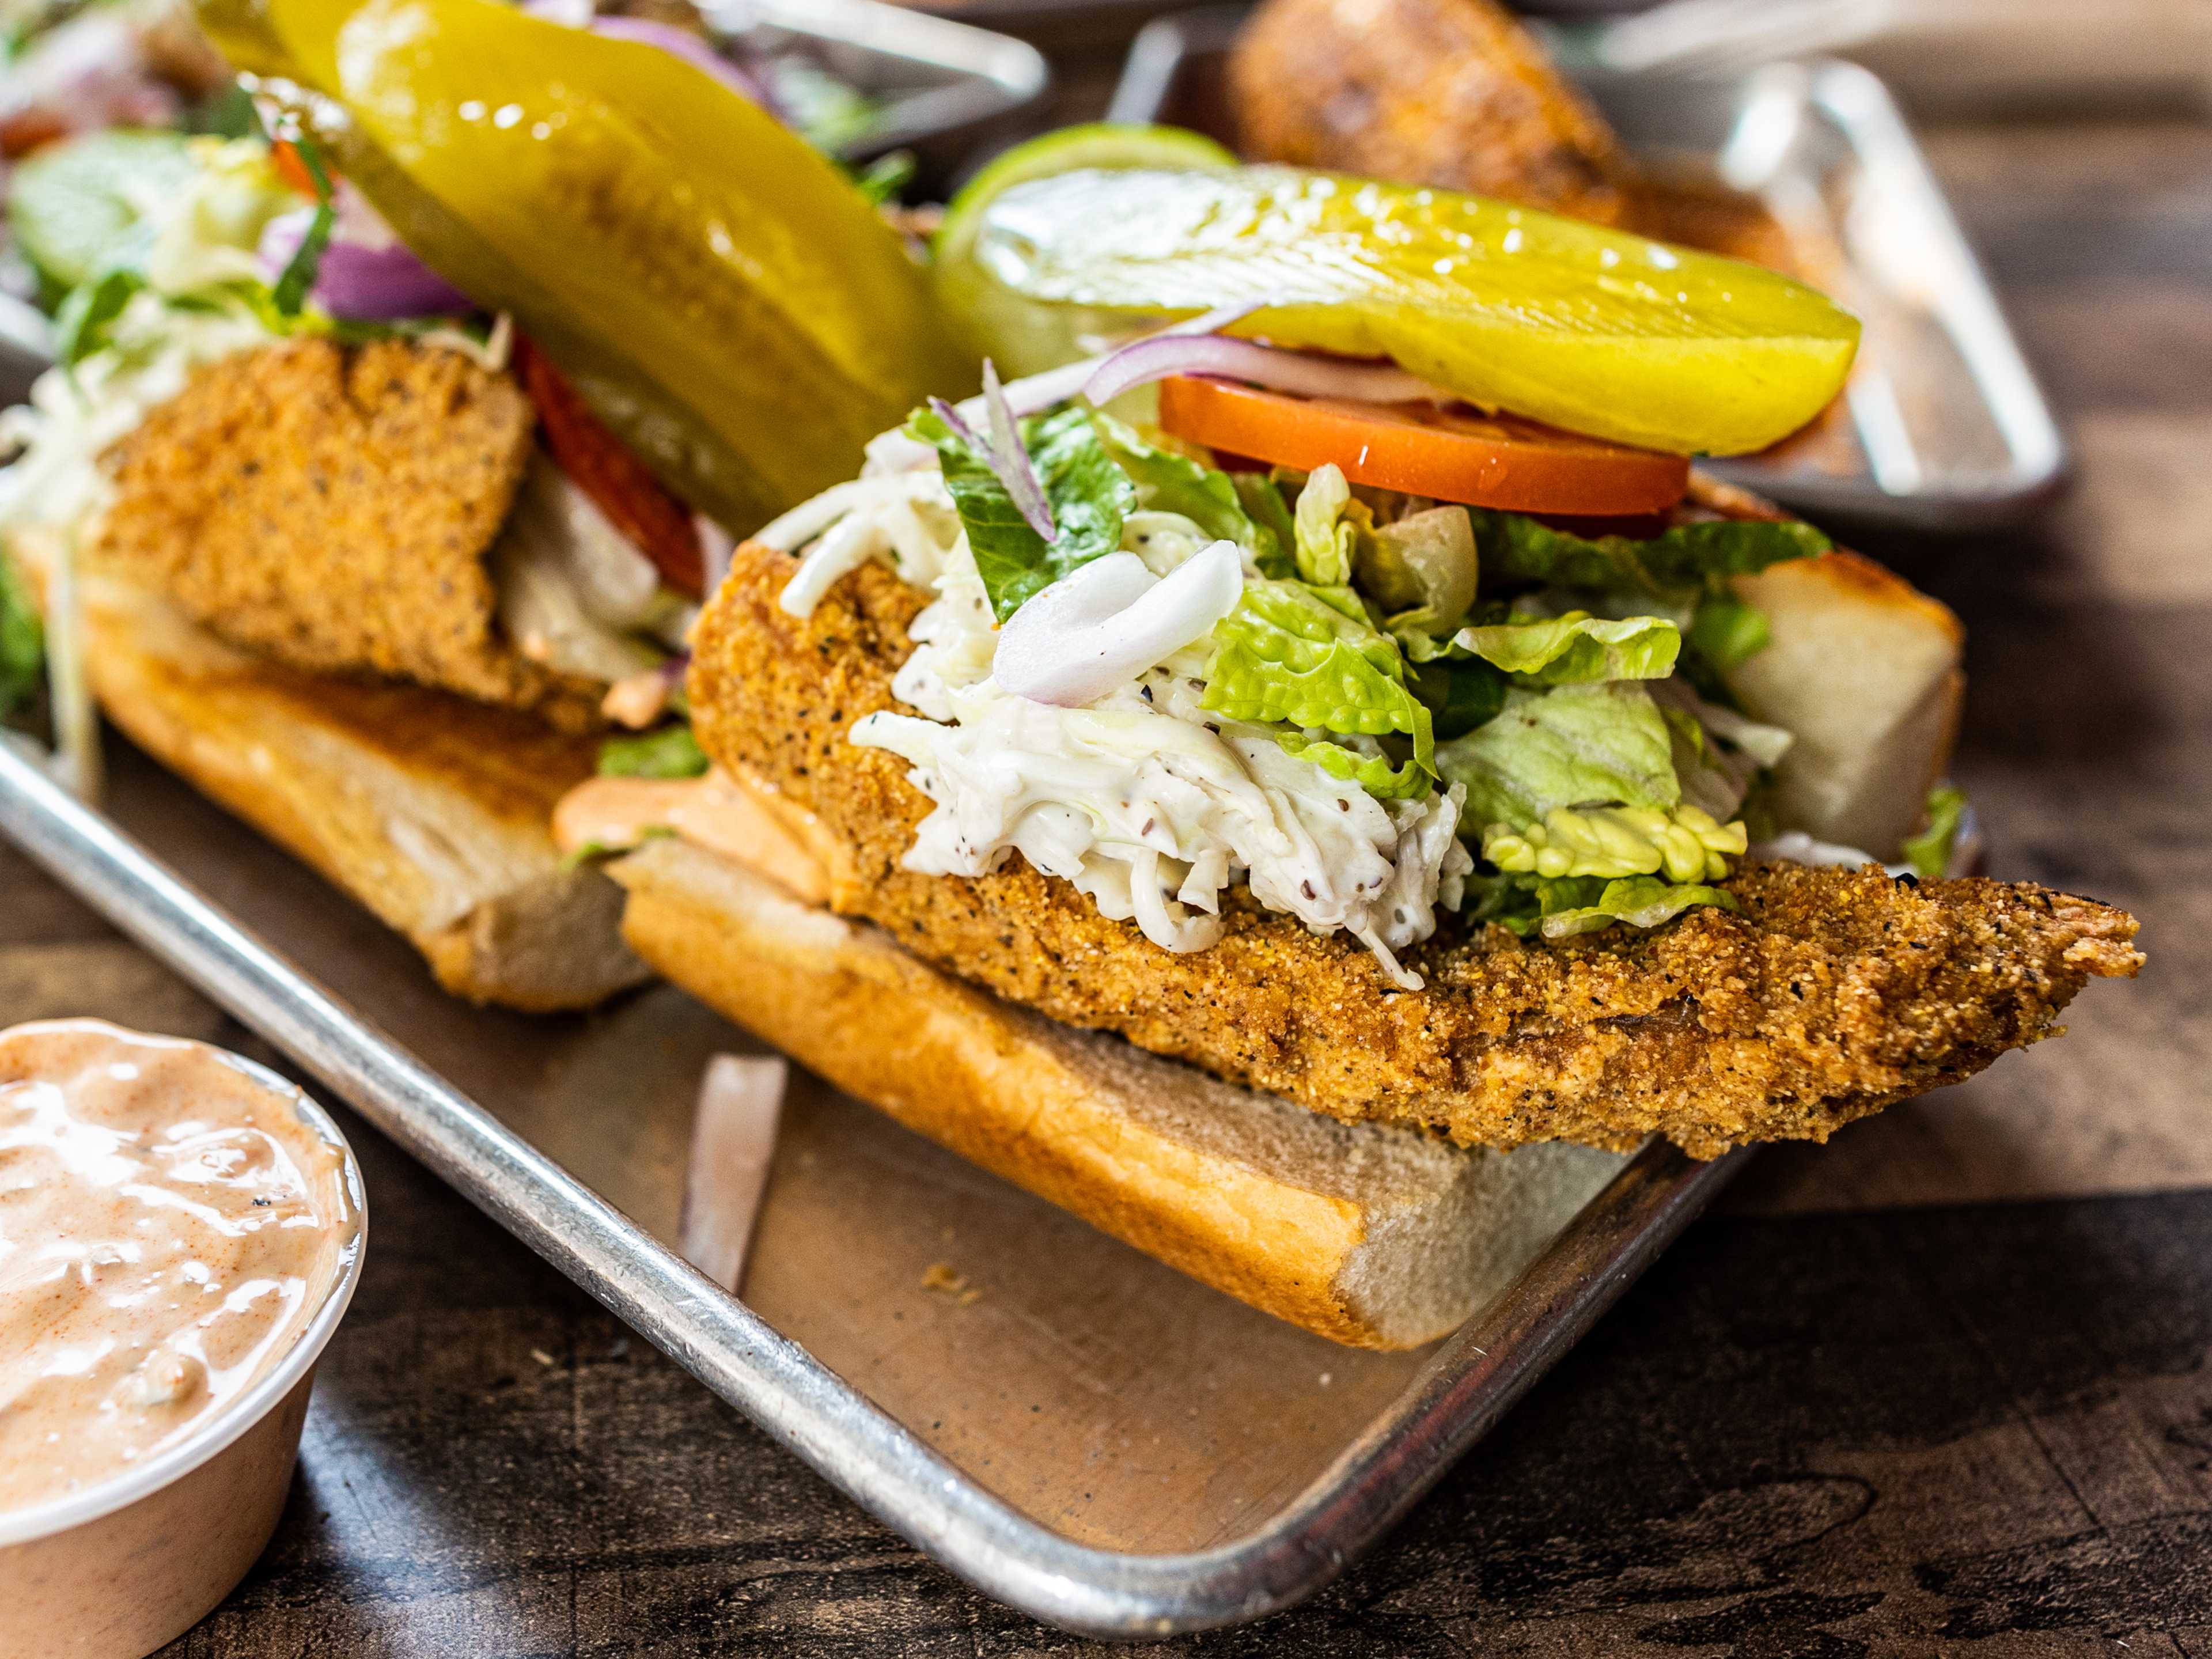 The fried snapper po' boy from Turf N Surf.